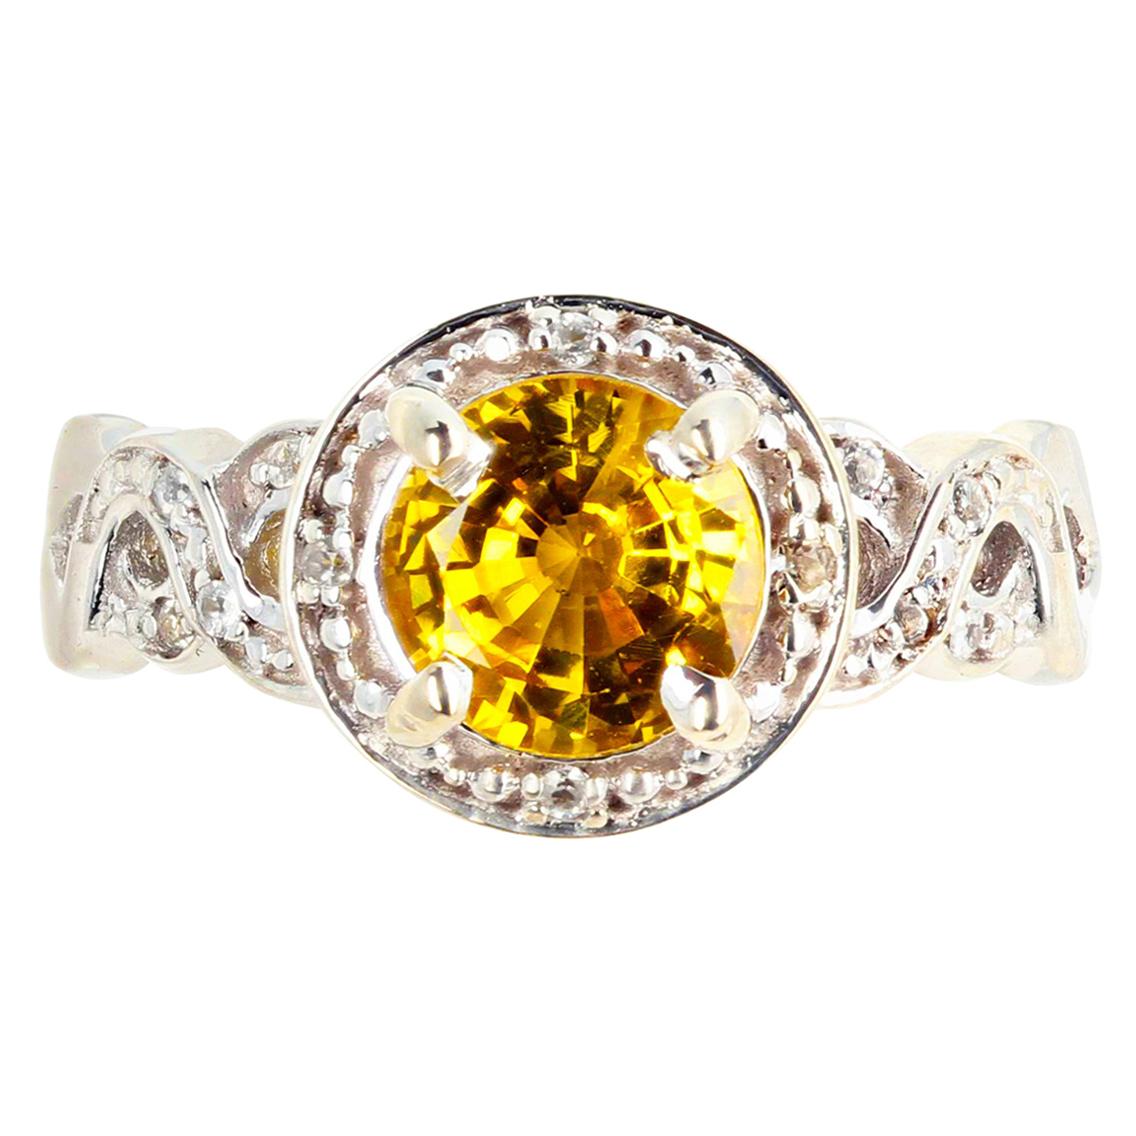 AJD Brilliantly Sparkling 1.3 Ct Canary Yellow Spinel & Diamonds Ring